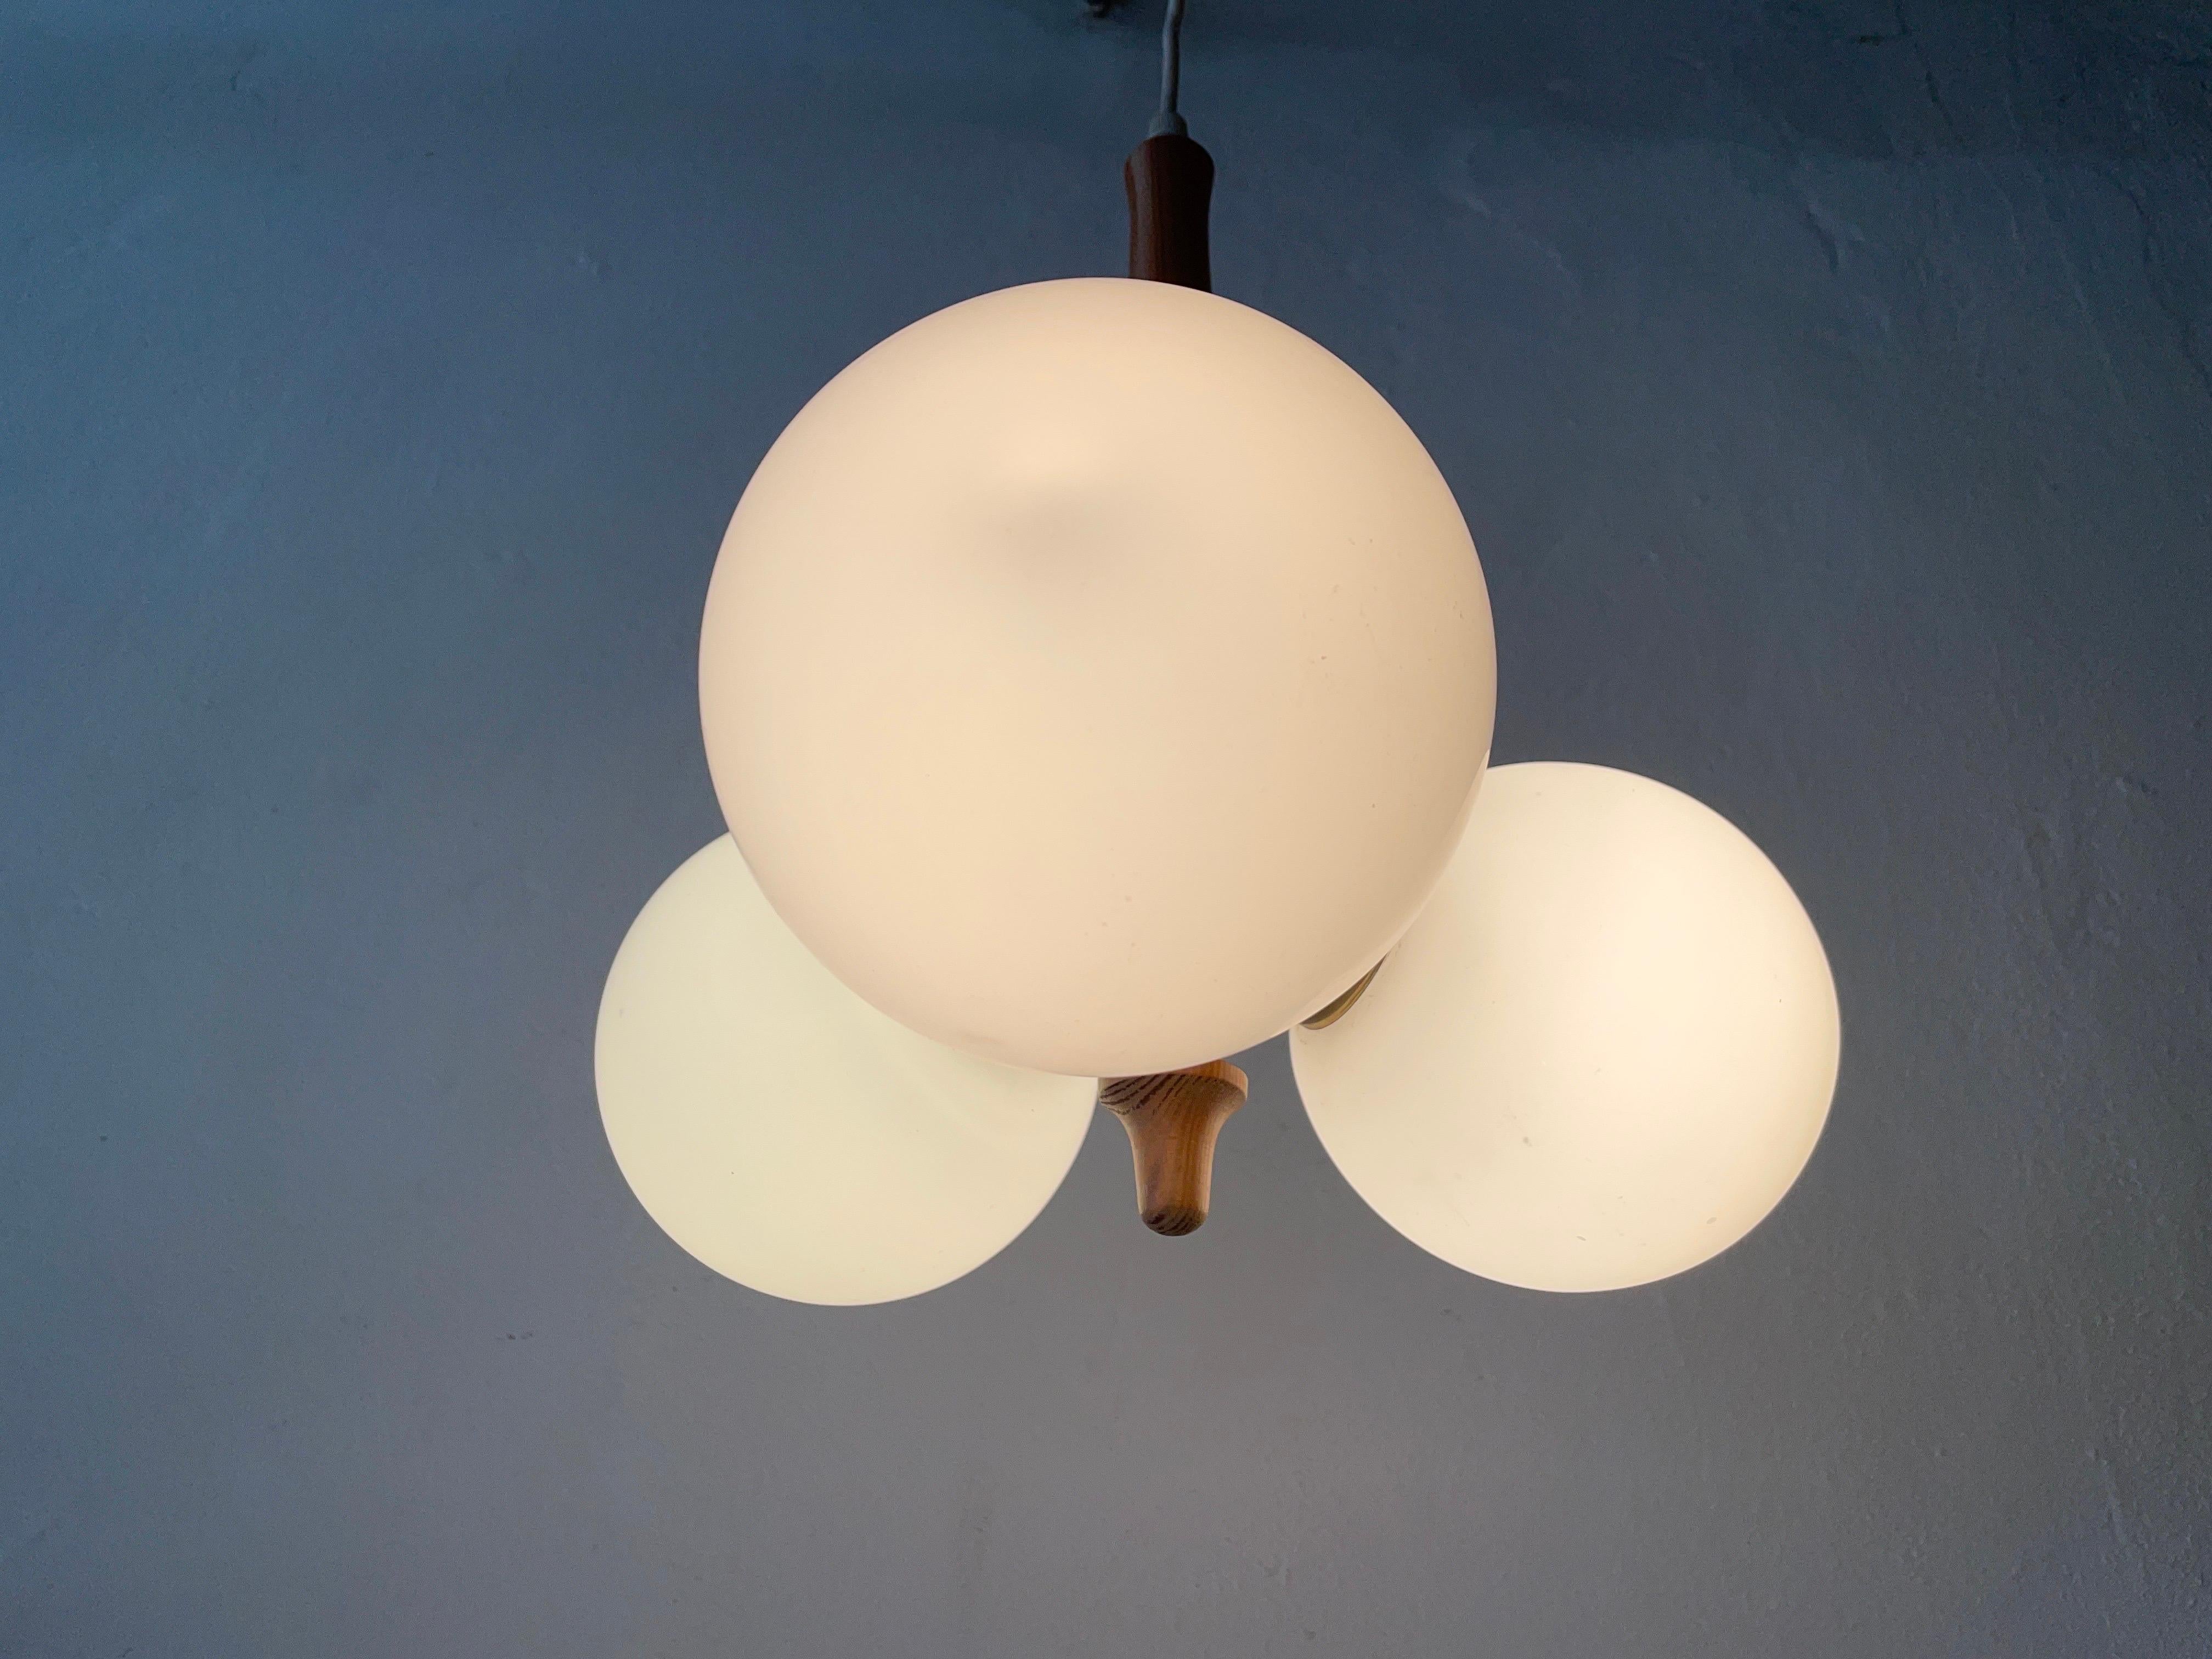 3 Opal Ball Glass and Wood Body Atomic Ceiling Lamp, 1970s, Germany For Sale 3